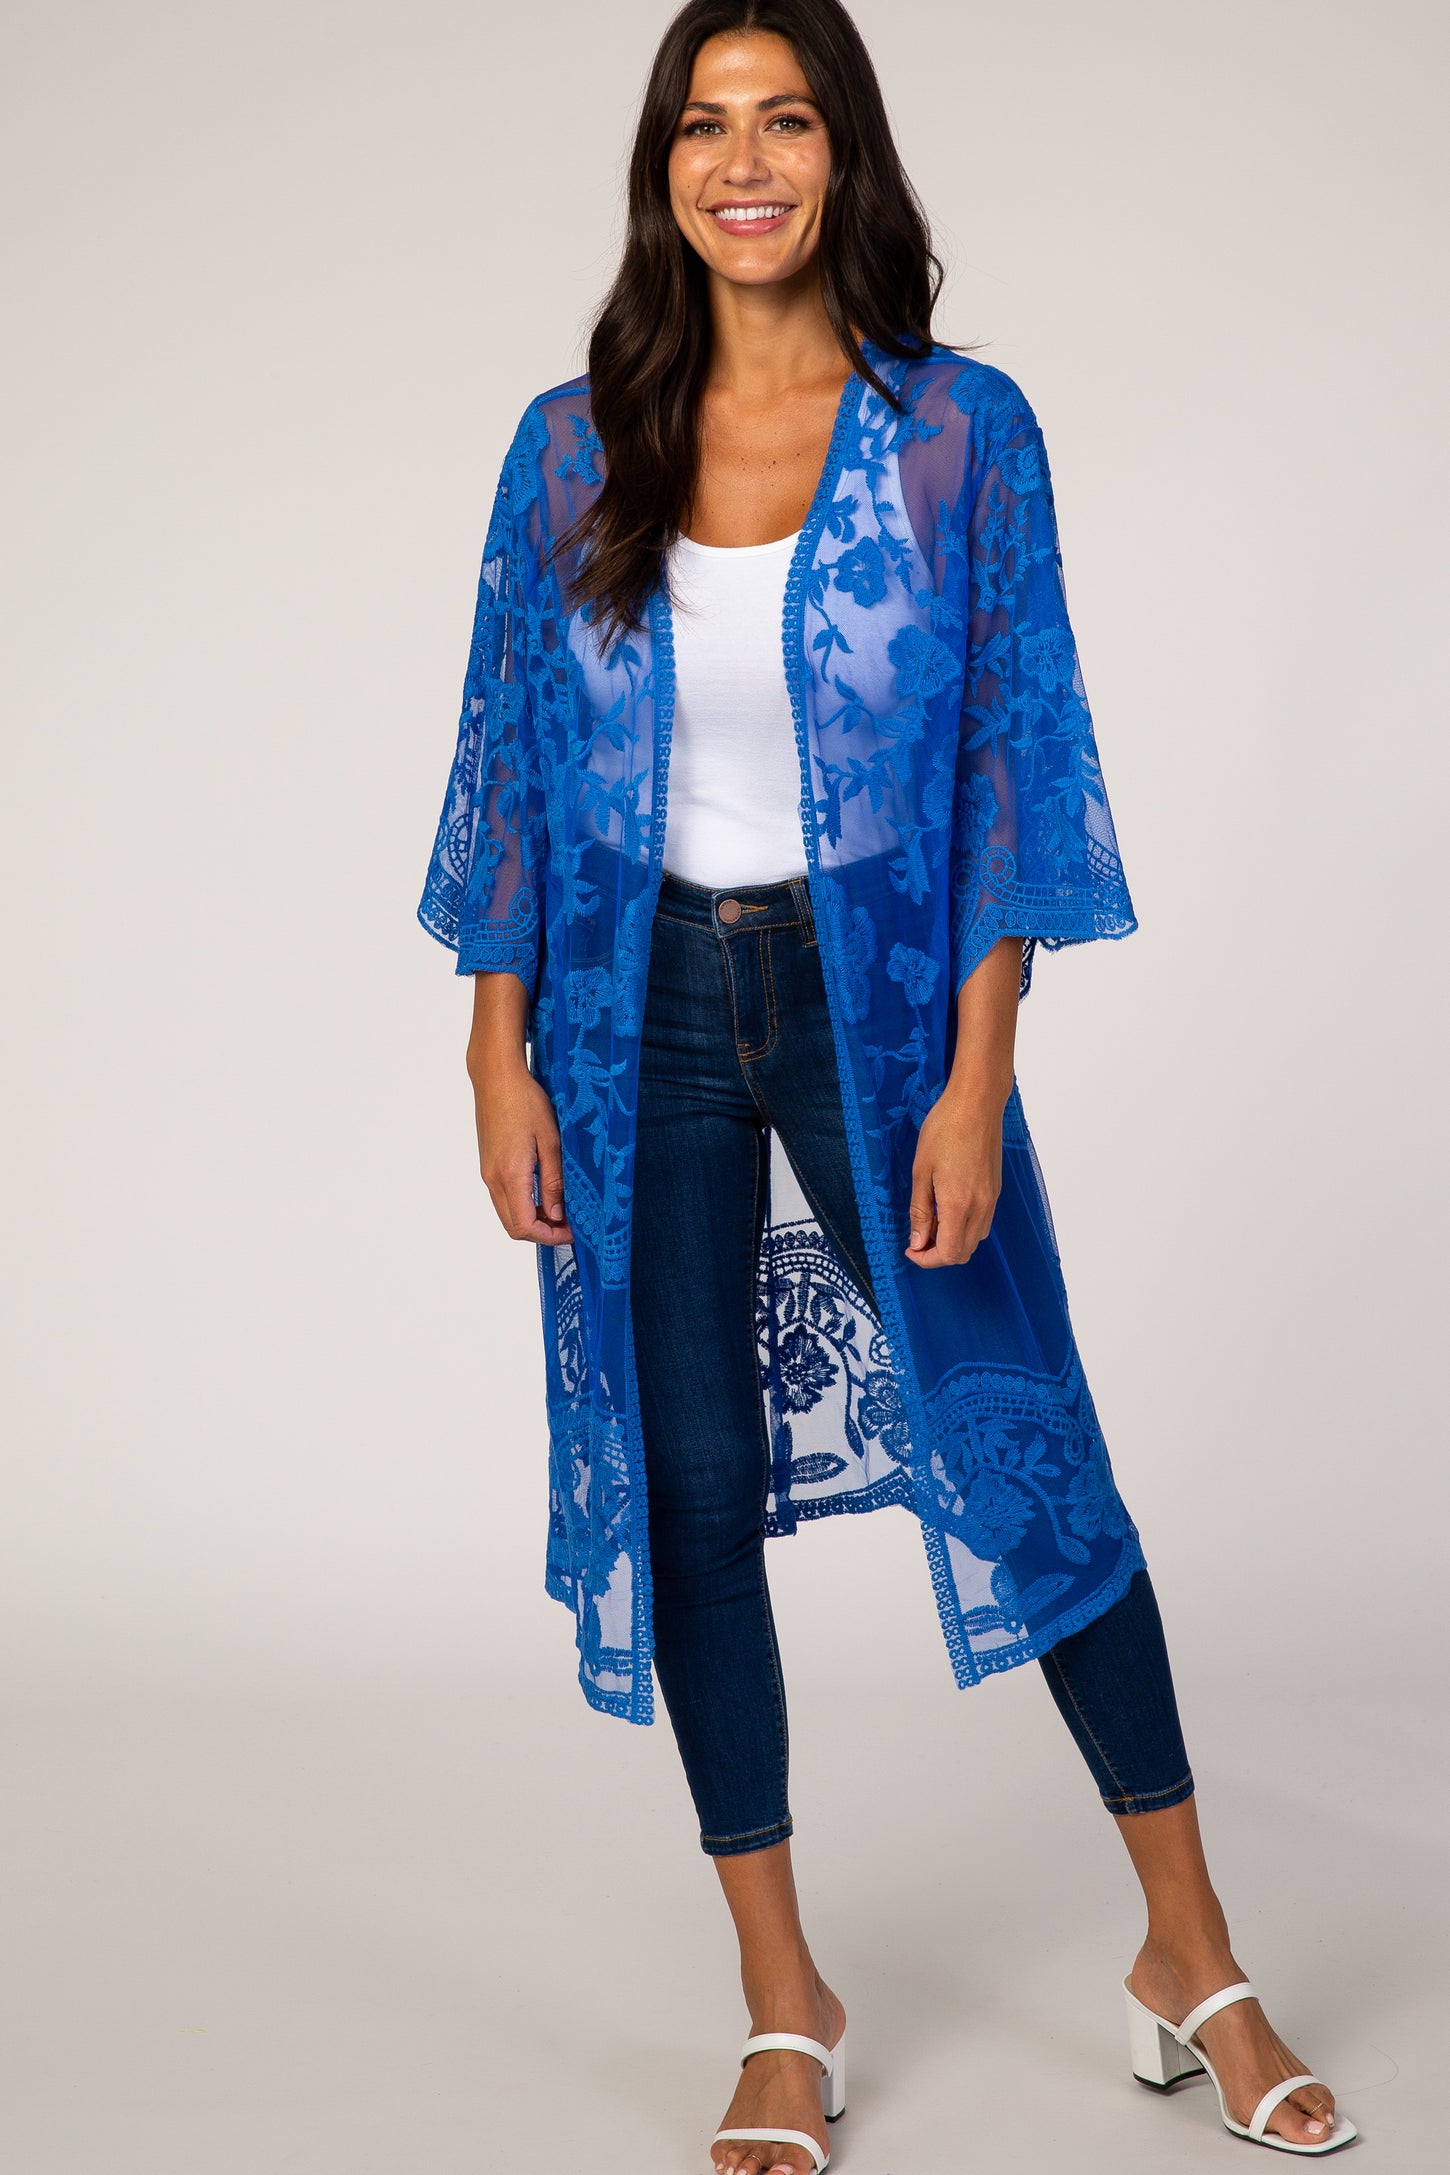 Royal Blue Mesh Lace Cover Up